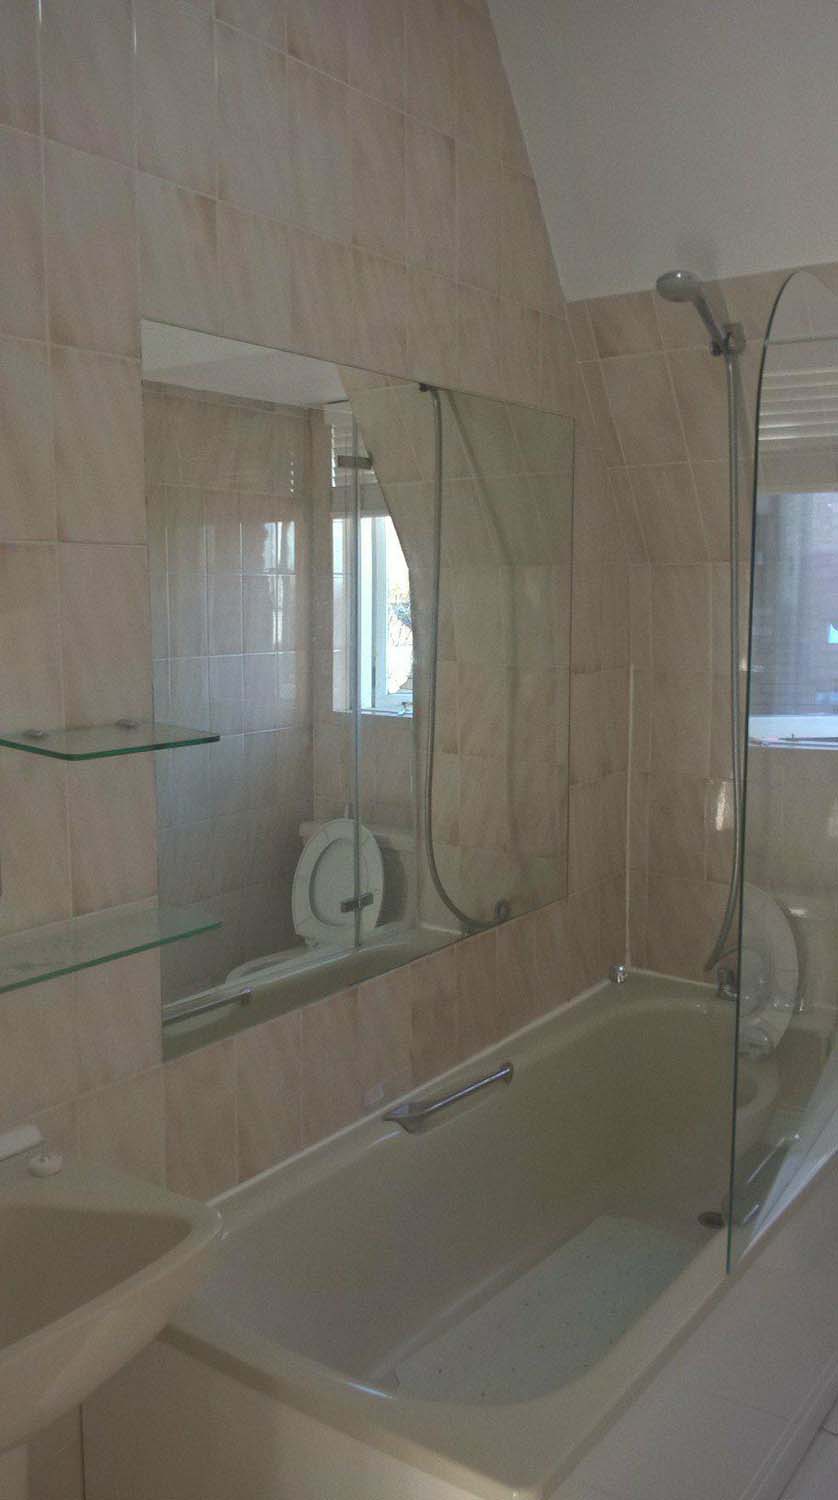 Bathroom WC Renovation In Muswell Hill North London